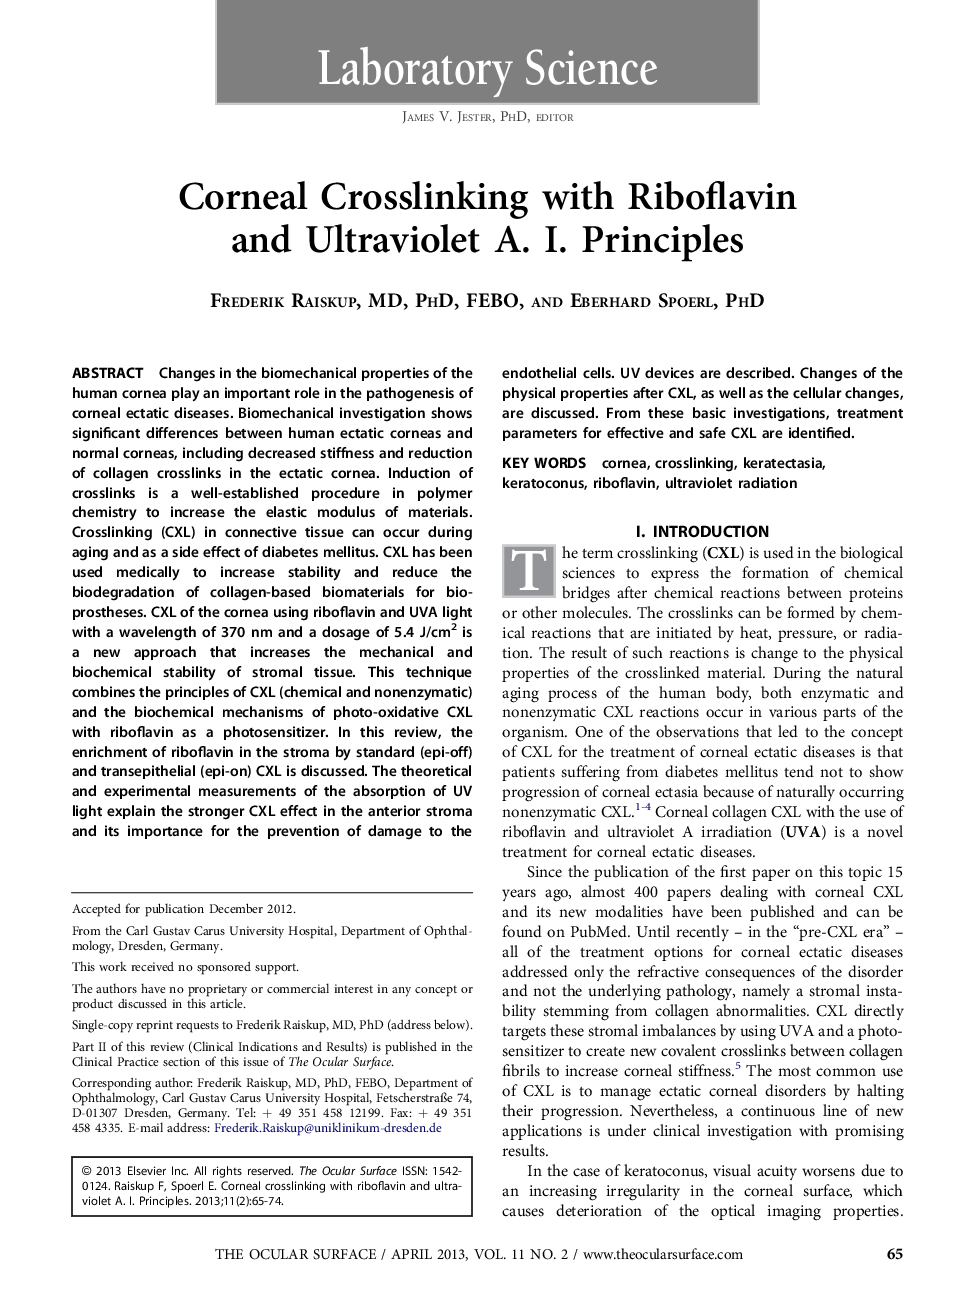 Corneal Crosslinking with Riboflavin and Ultraviolet A. I. Principles 